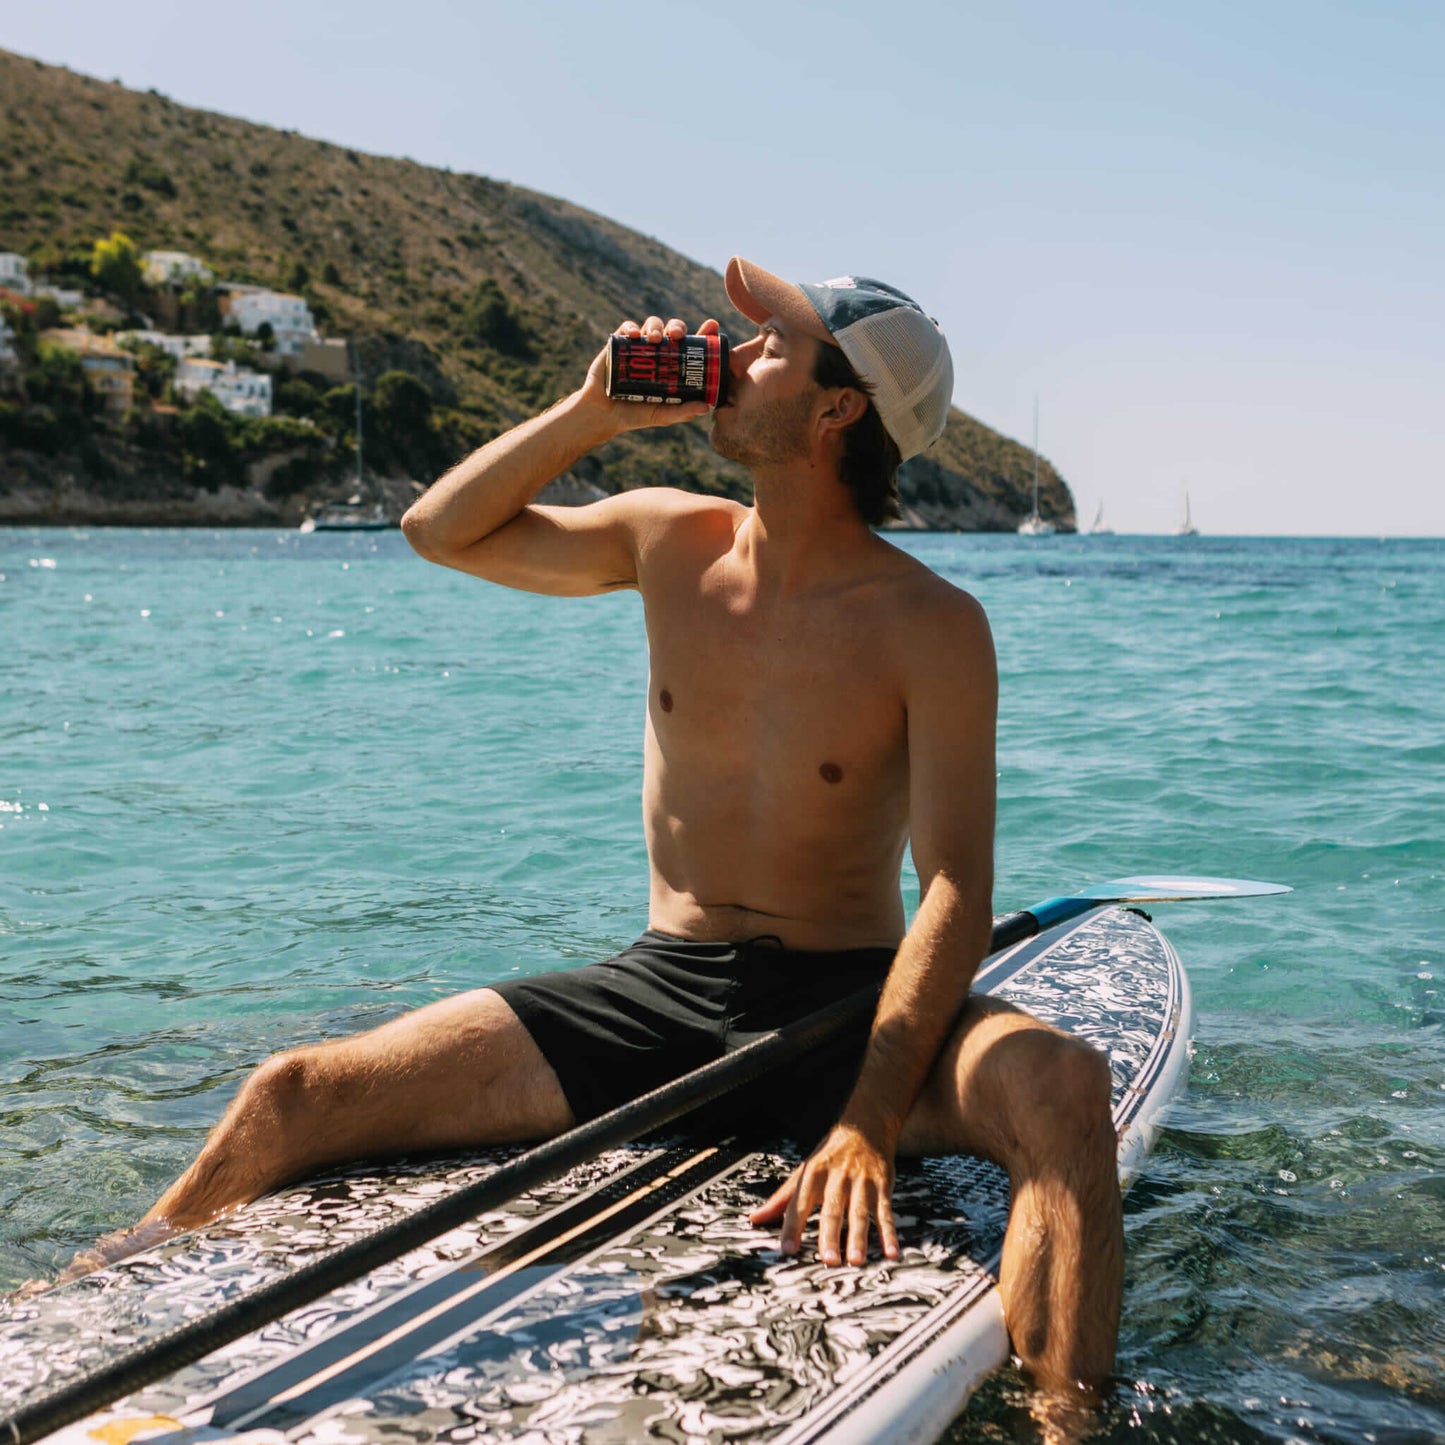 
                  
                    Aventura Self Heating Chocolate Drink Hot in 3 minutes being enjoyed by a person sitting on a paddle board in the sea
                  
                